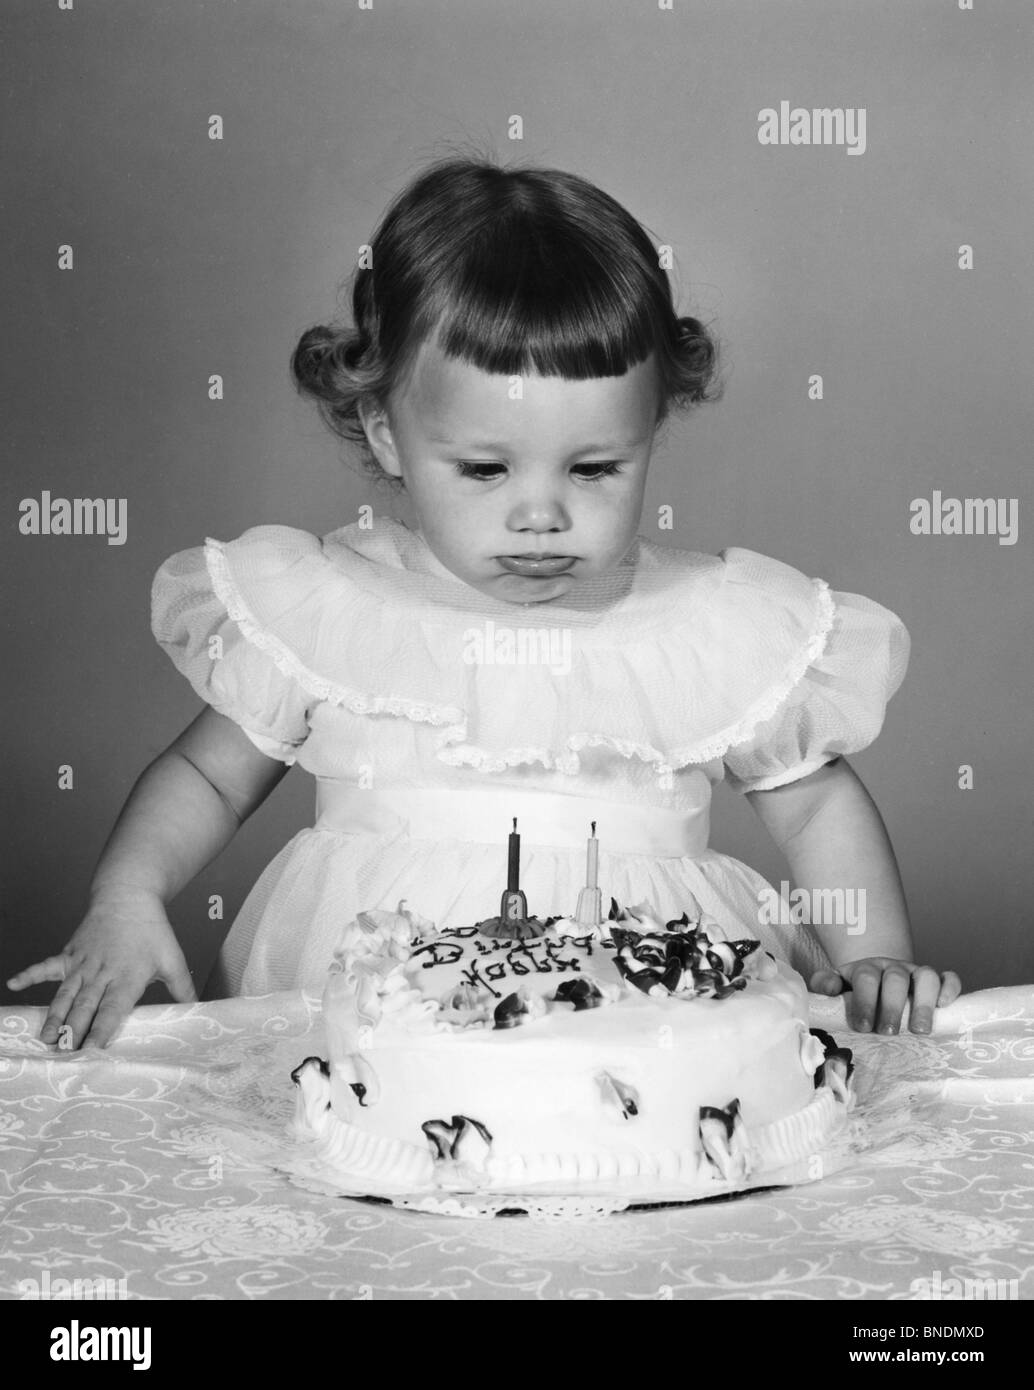 Girl looking at birthday cake, making a face Stock Photo